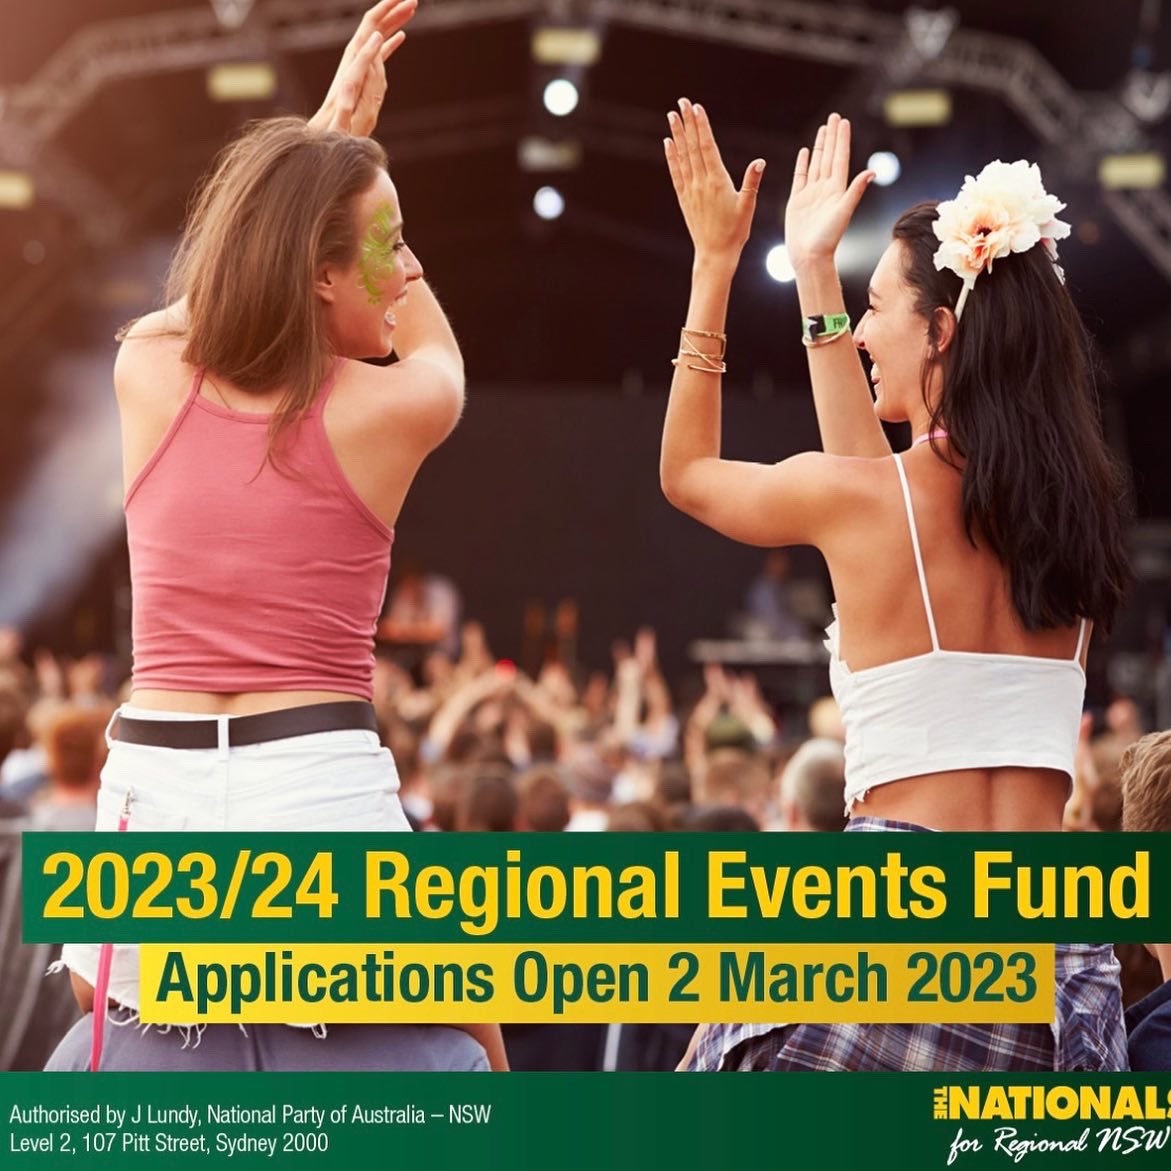 Ben Franklin: One week to go until applications close for the 2023/24 Regional …